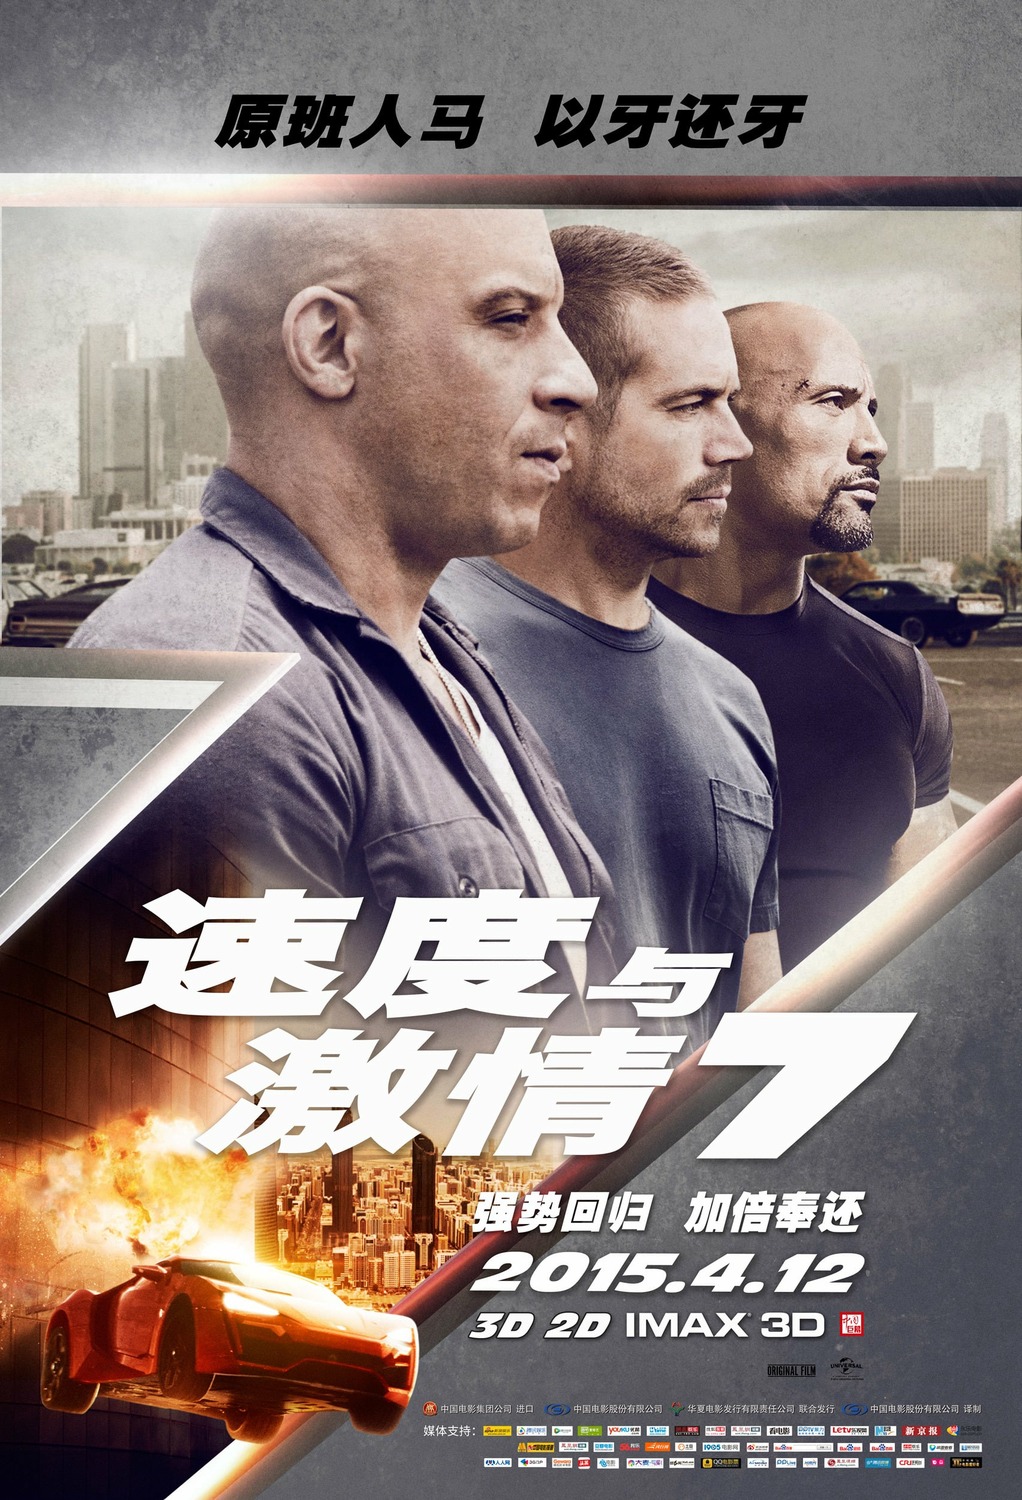 Extra Large Movie Poster Image for Furious 7 (#6 of 6)